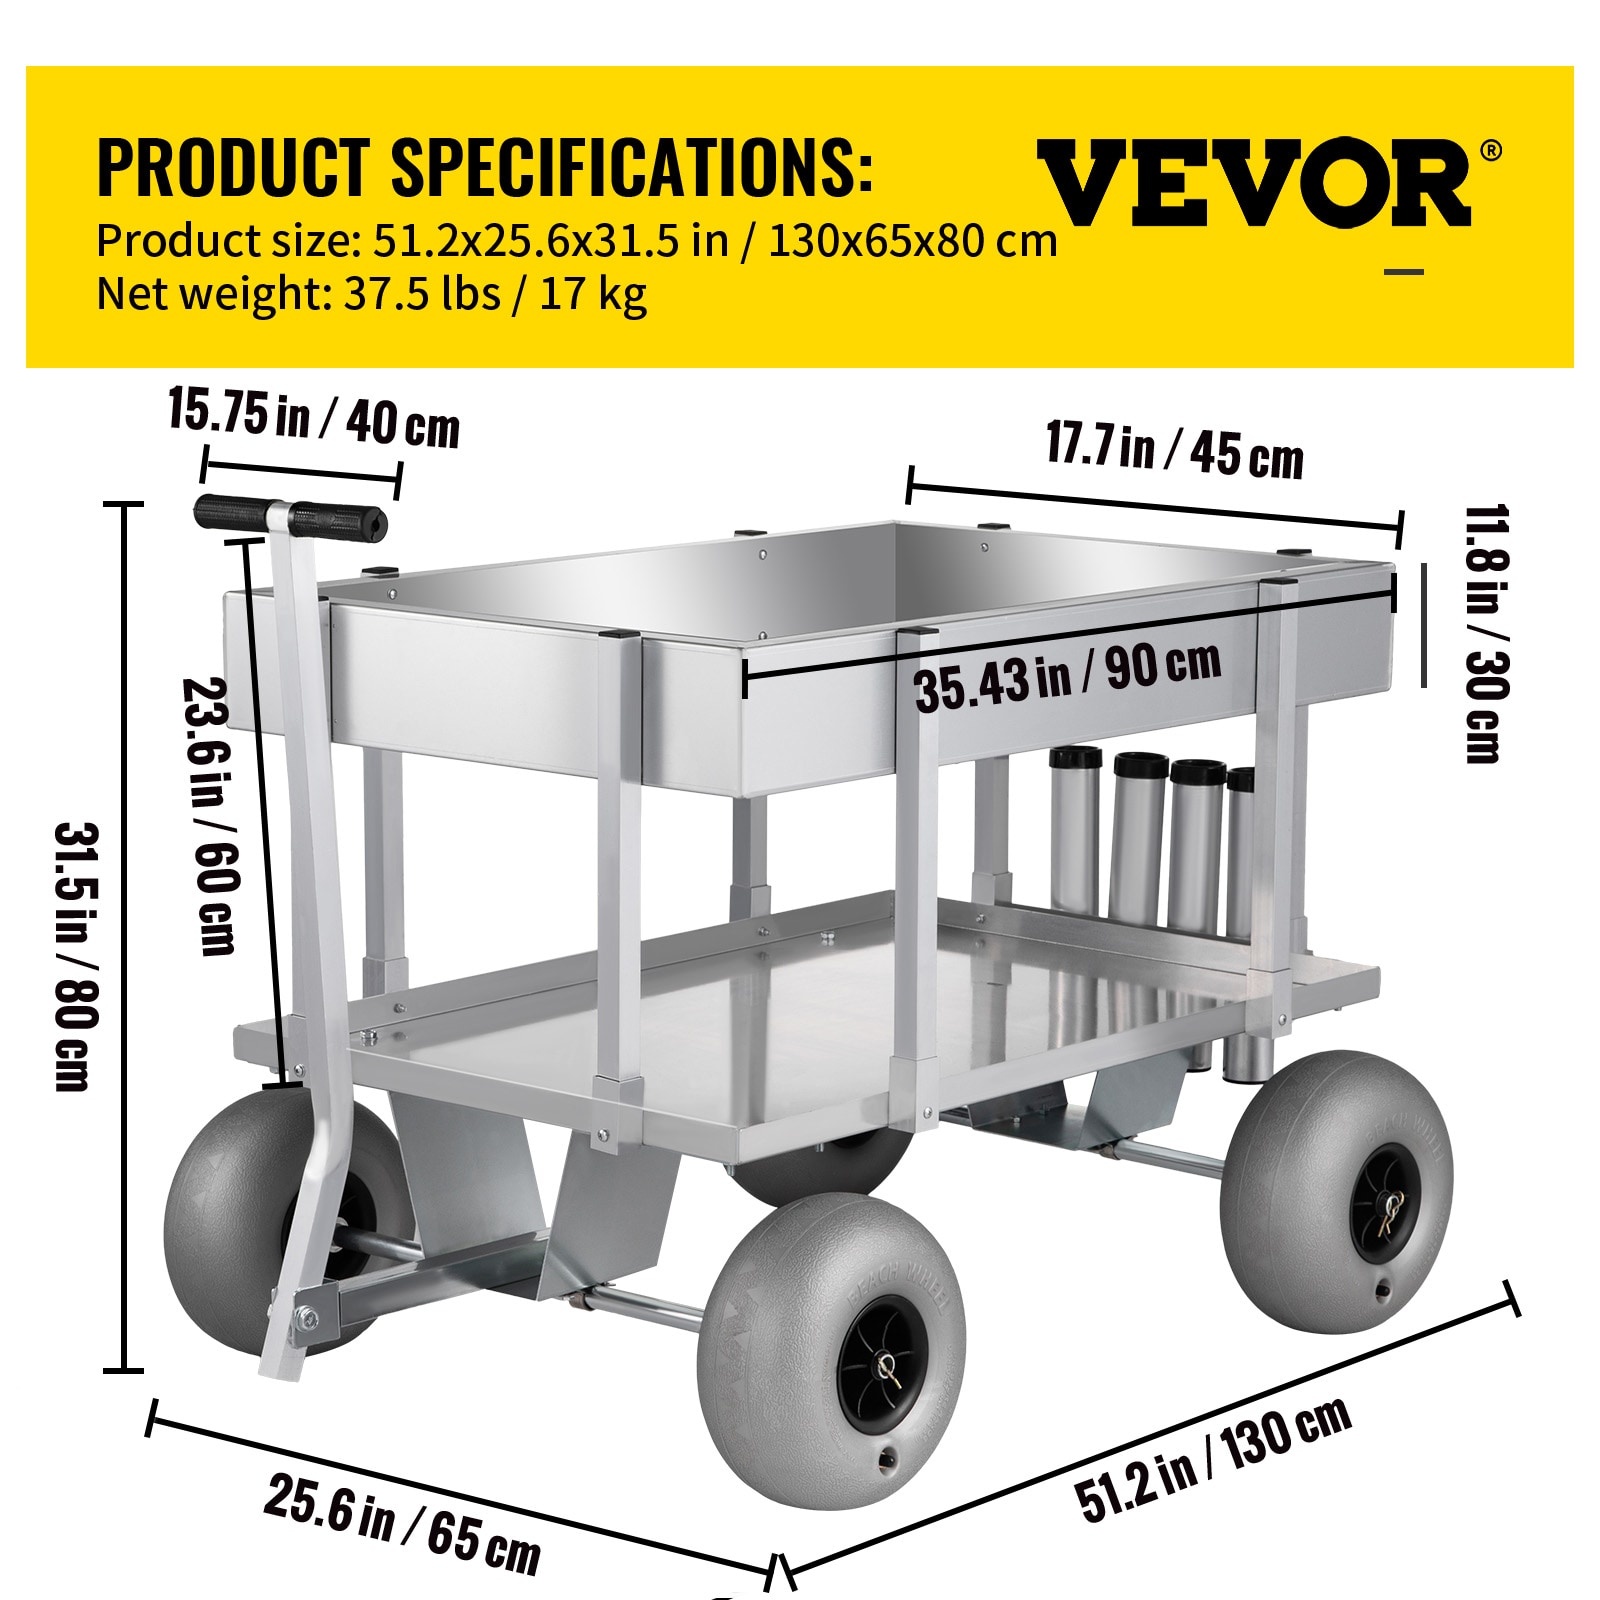 VEVOR Beach Fishing Cart, 200 lbs Load Capacity, Fish and Marine Cart with  Two 11 Big Wheels Rubber Balloon Tires for Sand, Heavy-Duty Steel Pier